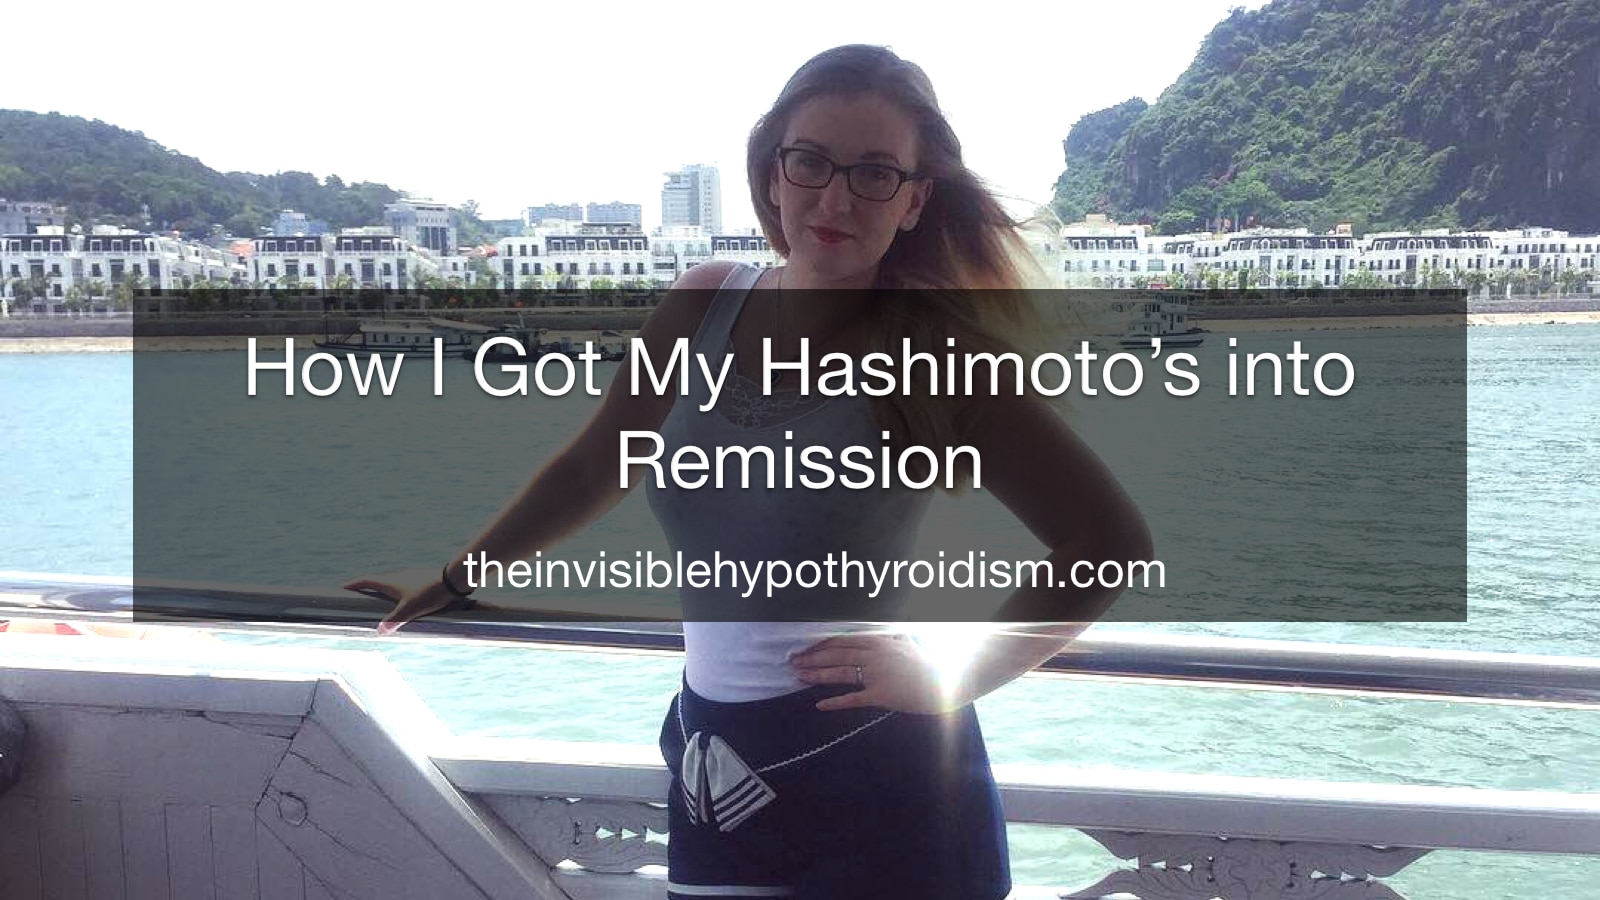 How I Got My Hashimoto’s into Remission